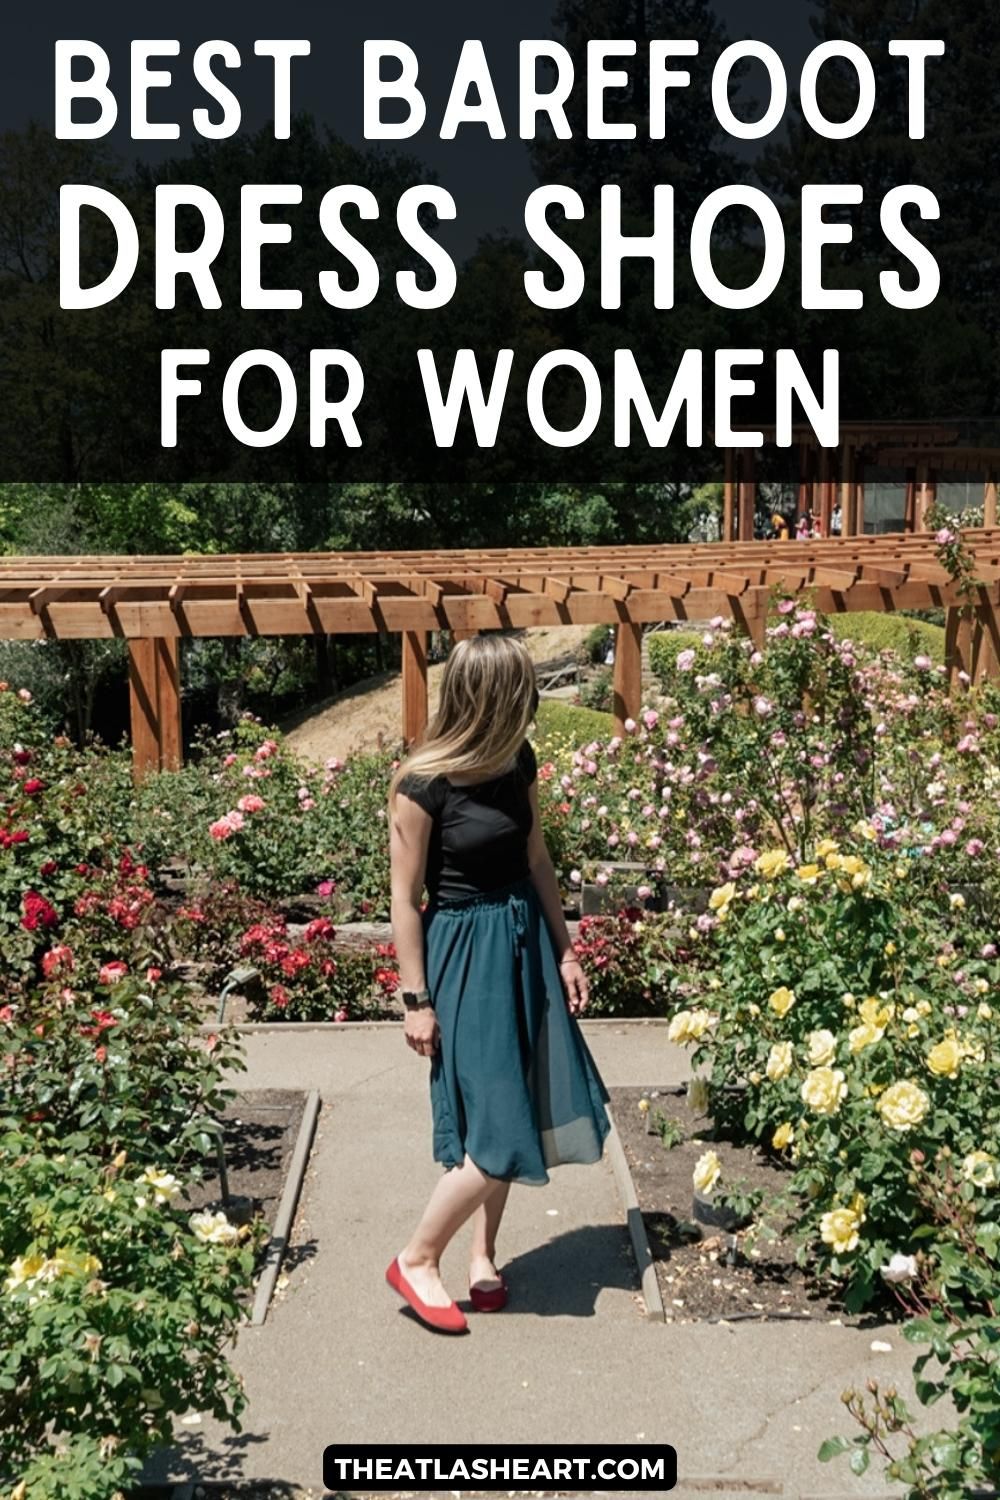 A light-haired woman wearing a turquoise skirt and red flats looks away from the camera over her shoulder as she stands on a path in a sunny rose garden, with the text overlay, "Best Barefoot Dress Shoes for Women."